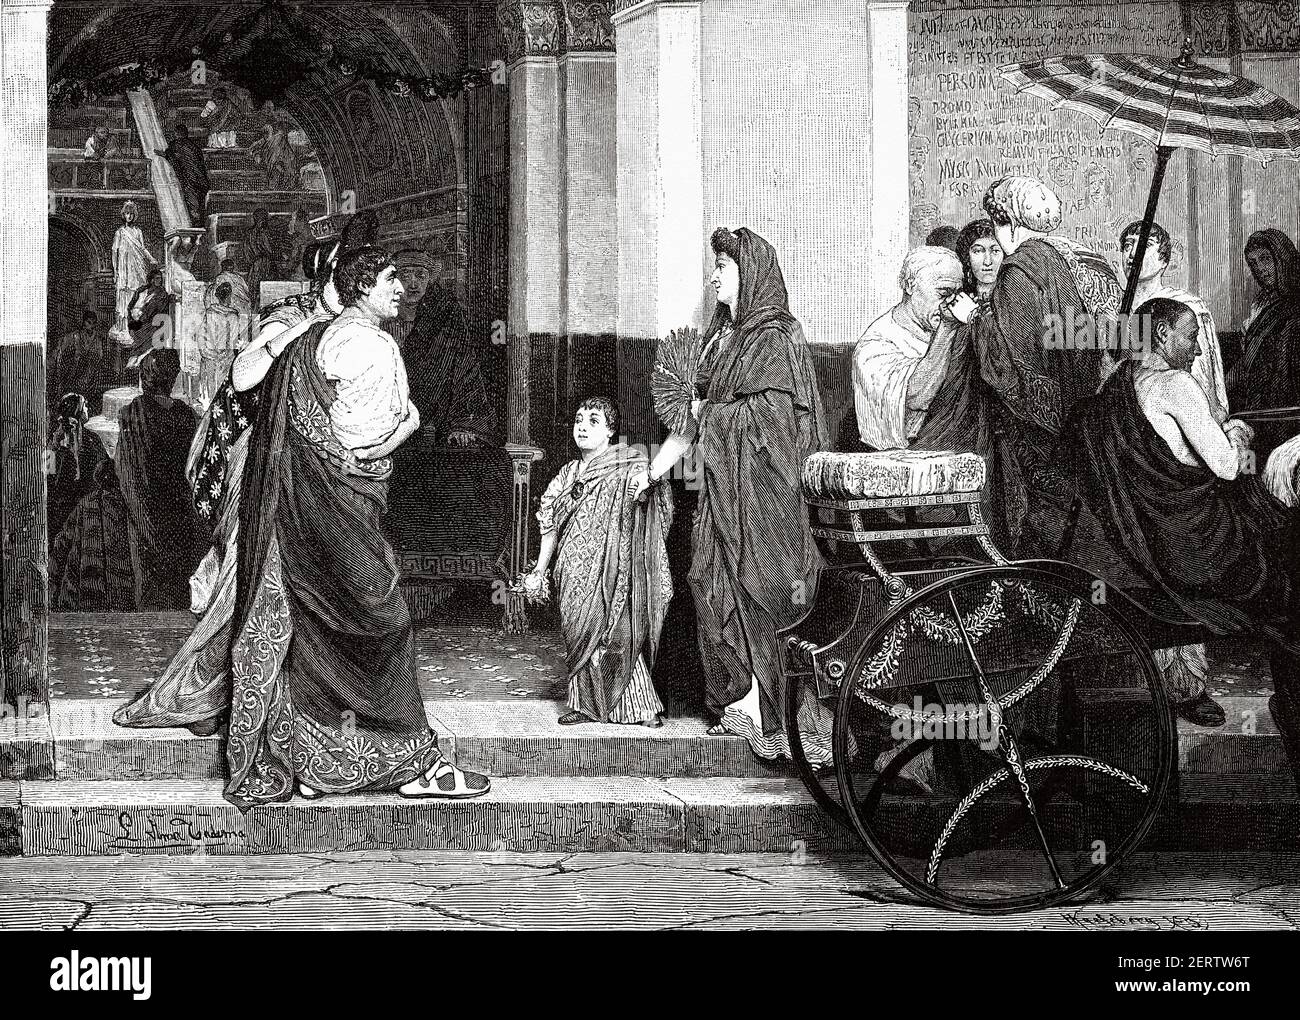 At the door of the theater in ancient Rome, Ancient roman empire. Italy, Europe. Old 19th century engraved illustration, El Mundo Ilustrado 1881 Stock Photo